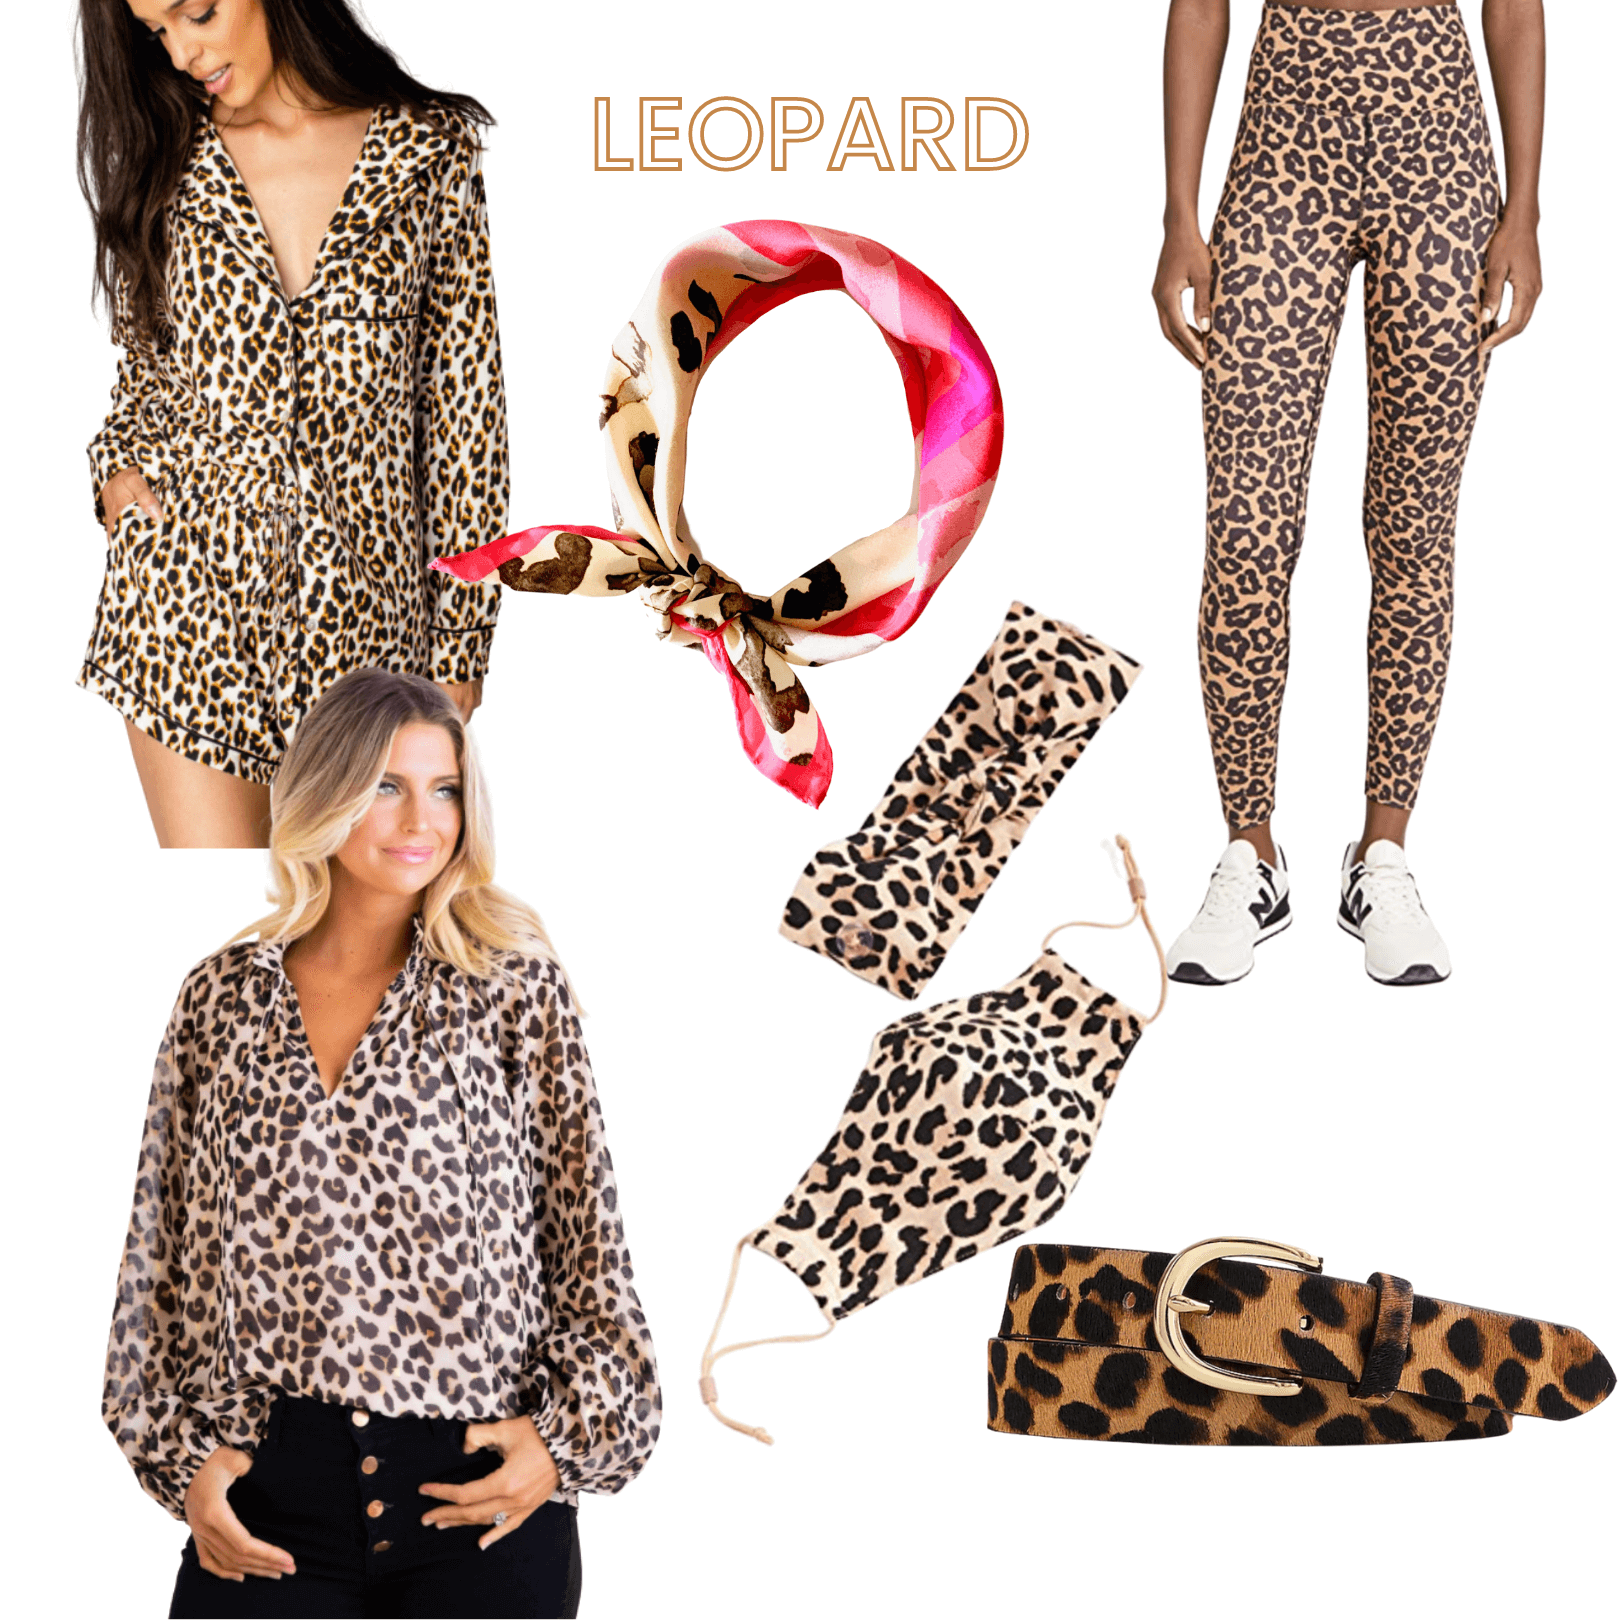 My Faves in Leopard!